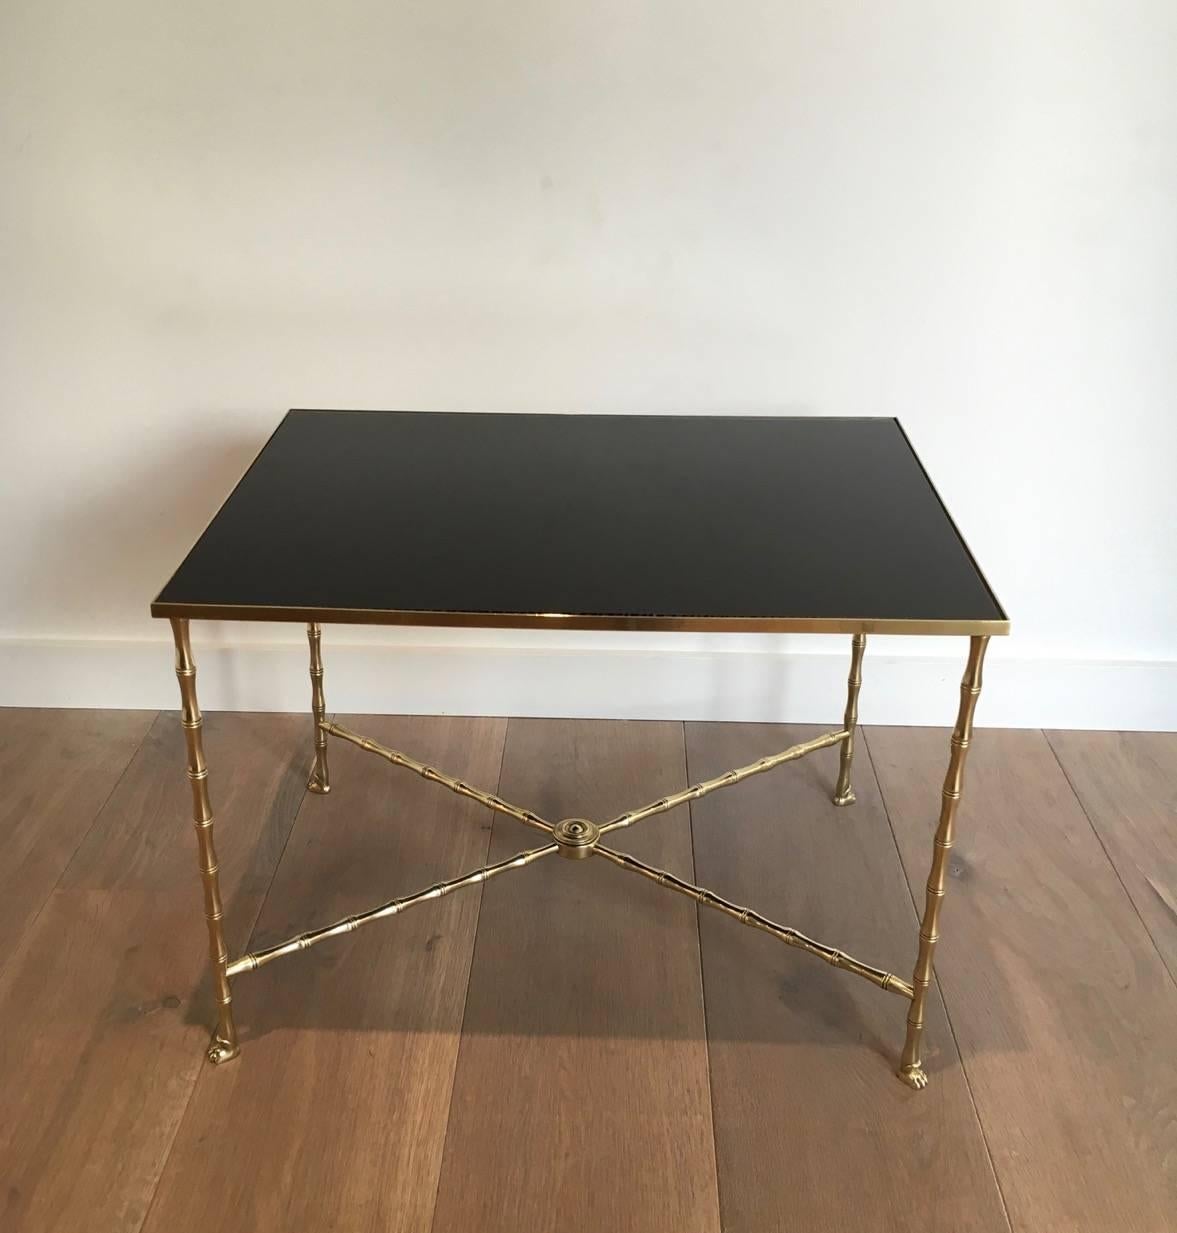 Maison Bagués gilt bronze coffee table, faux-bamboo frame with claw feet. The top is black glass. This item is currently in France, please allow 2 to 4 weeks delivery to New York. Shipping costs from France to our warehouse in New York included in